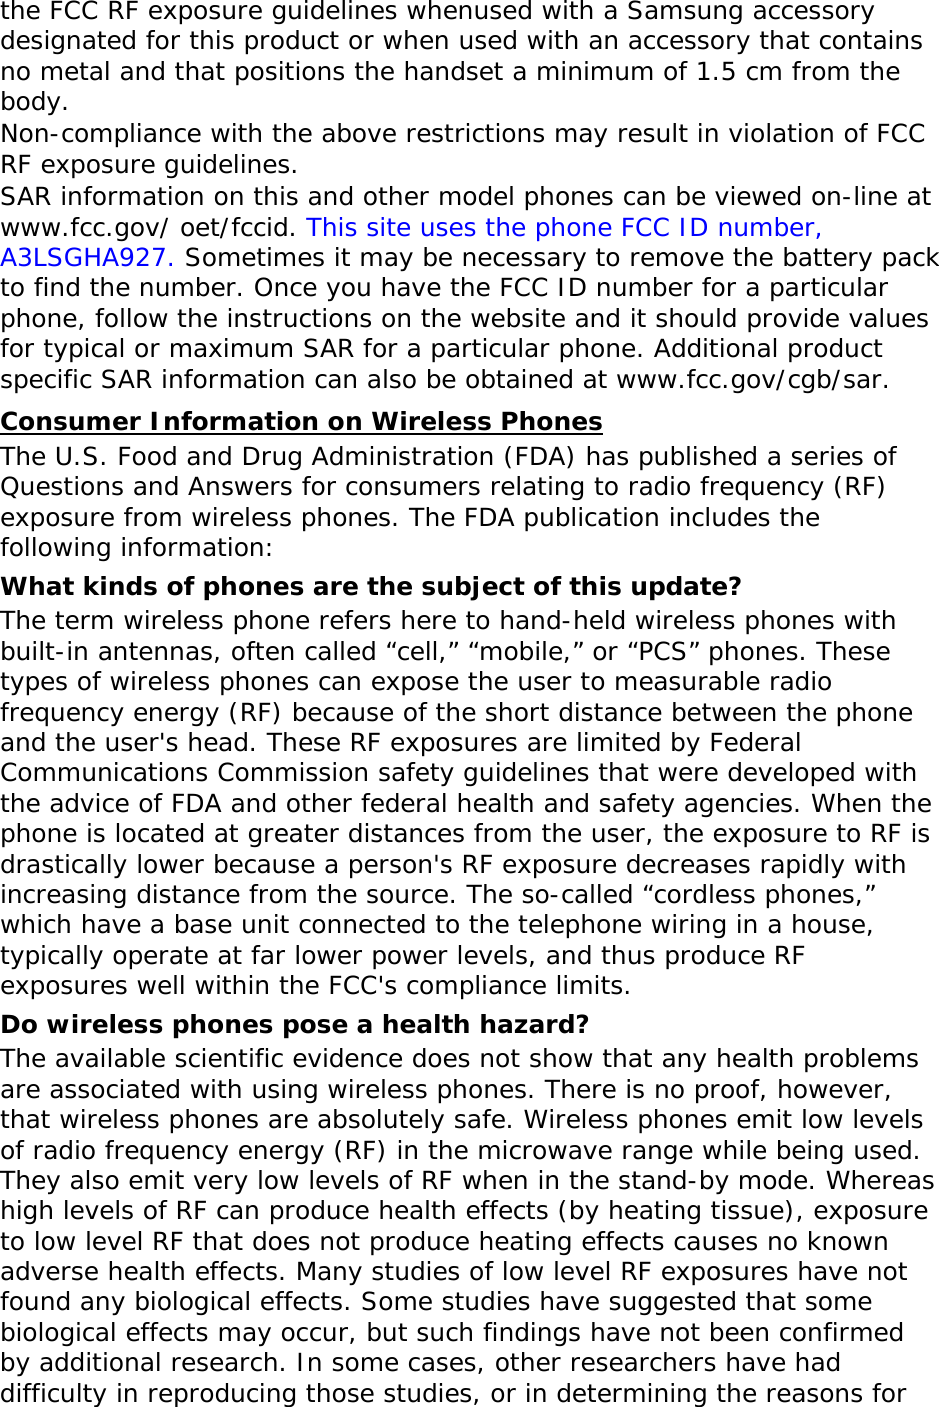 the FCC RF exposure guidelines whenused with a Samsung accessory designated for this product or when used with an accessory that contains no metal and that positions the handset a minimum of 1.5 cm from the body.  Non-compliance with the above restrictions may result in violation of FCC RF exposure guidelines. SAR information on this and other model phones can be viewed on-line at www.fcc.gov/ oet/fccid. This site uses the phone FCC ID number, A3LSGHA927. Sometimes it may be necessary to remove the battery pack to find the number. Once you have the FCC ID number for a particular phone, follow the instructions on the website and it should provide values for typical or maximum SAR for a particular phone. Additional product specific SAR information can also be obtained at www.fcc.gov/cgb/sar. Consumer Information on Wireless Phones The U.S. Food and Drug Administration (FDA) has published a series of Questions and Answers for consumers relating to radio frequency (RF) exposure from wireless phones. The FDA publication includes the following information: What kinds of phones are the subject of this update? The term wireless phone refers here to hand-held wireless phones with built-in antennas, often called “cell,” “mobile,” or “PCS” phones. These types of wireless phones can expose the user to measurable radio frequency energy (RF) because of the short distance between the phone and the user&apos;s head. These RF exposures are limited by Federal Communications Commission safety guidelines that were developed with the advice of FDA and other federal health and safety agencies. When the phone is located at greater distances from the user, the exposure to RF is drastically lower because a person&apos;s RF exposure decreases rapidly with increasing distance from the source. The so-called “cordless phones,” which have a base unit connected to the telephone wiring in a house, typically operate at far lower power levels, and thus produce RF exposures well within the FCC&apos;s compliance limits. Do wireless phones pose a health hazard? The available scientific evidence does not show that any health problems are associated with using wireless phones. There is no proof, however, that wireless phones are absolutely safe. Wireless phones emit low levels of radio frequency energy (RF) in the microwave range while being used. They also emit very low levels of RF when in the stand-by mode. Whereas high levels of RF can produce health effects (by heating tissue), exposure to low level RF that does not produce heating effects causes no known adverse health effects. Many studies of low level RF exposures have not found any biological effects. Some studies have suggested that some biological effects may occur, but such findings have not been confirmed by additional research. In some cases, other researchers have had difficulty in reproducing those studies, or in determining the reasons for 